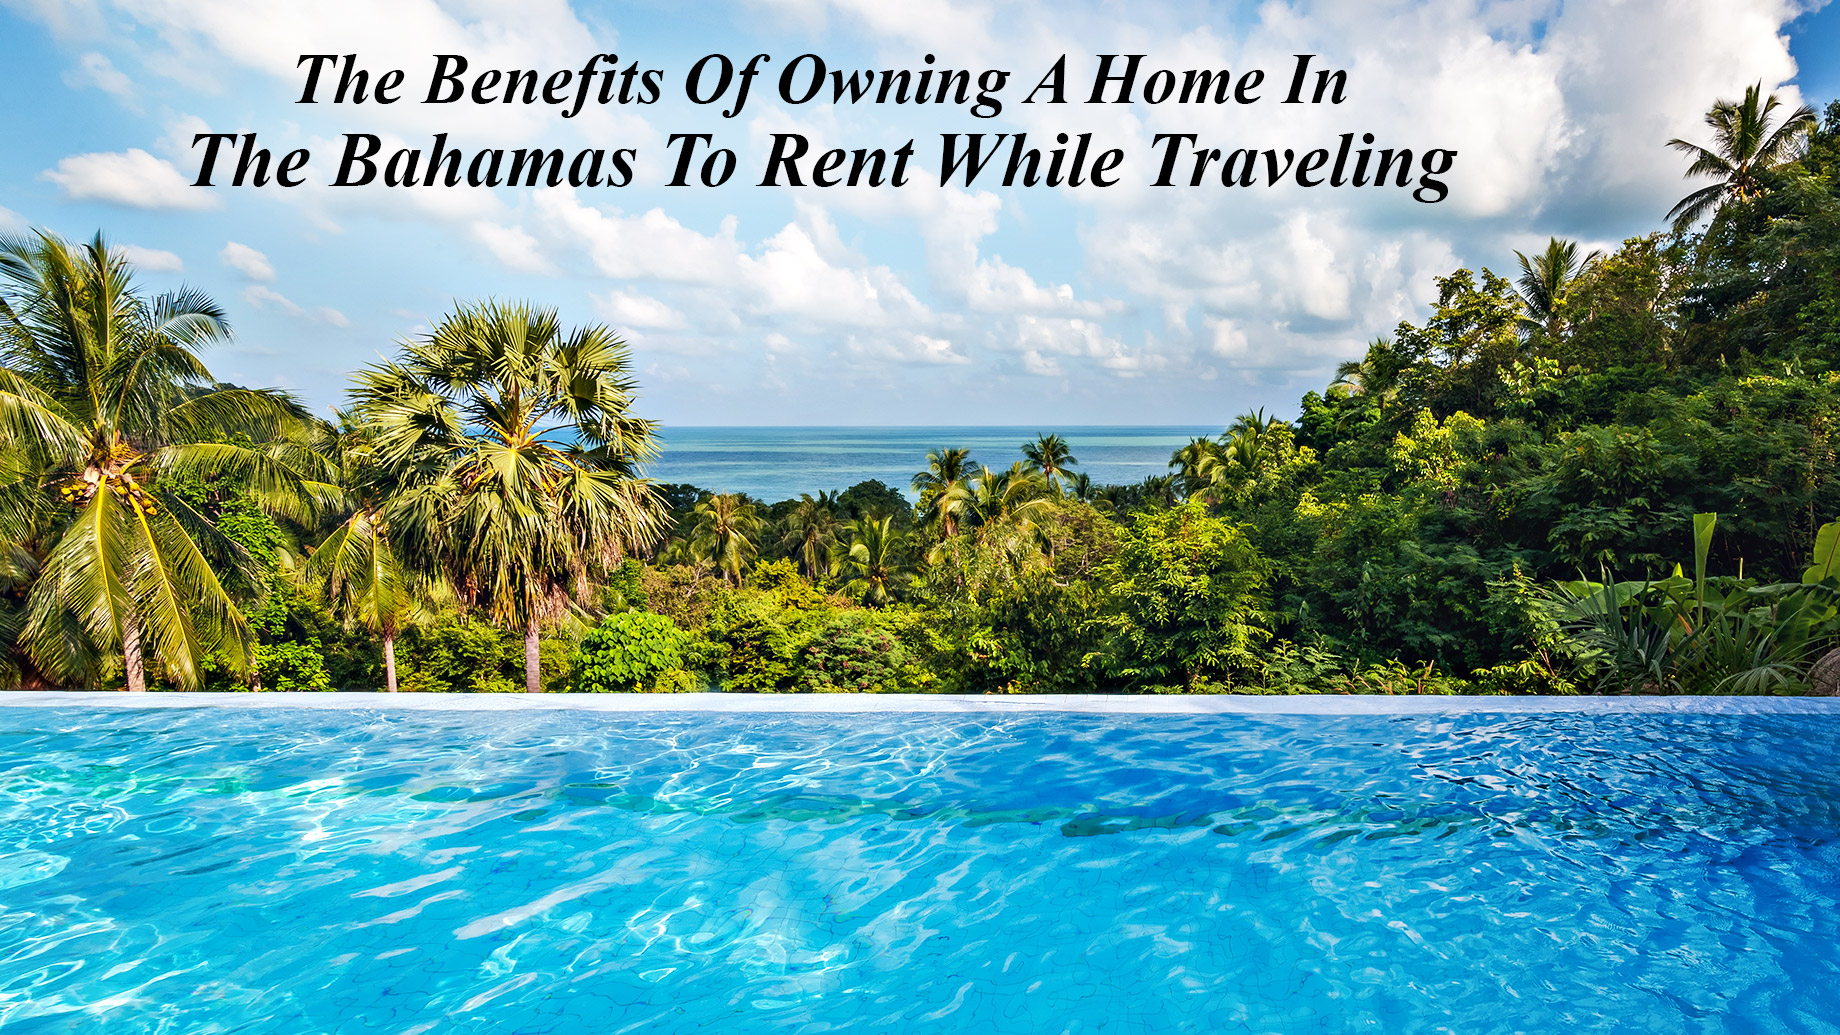 The Benefits Of Owning A Home In The Bahamas To Rent While Traveling